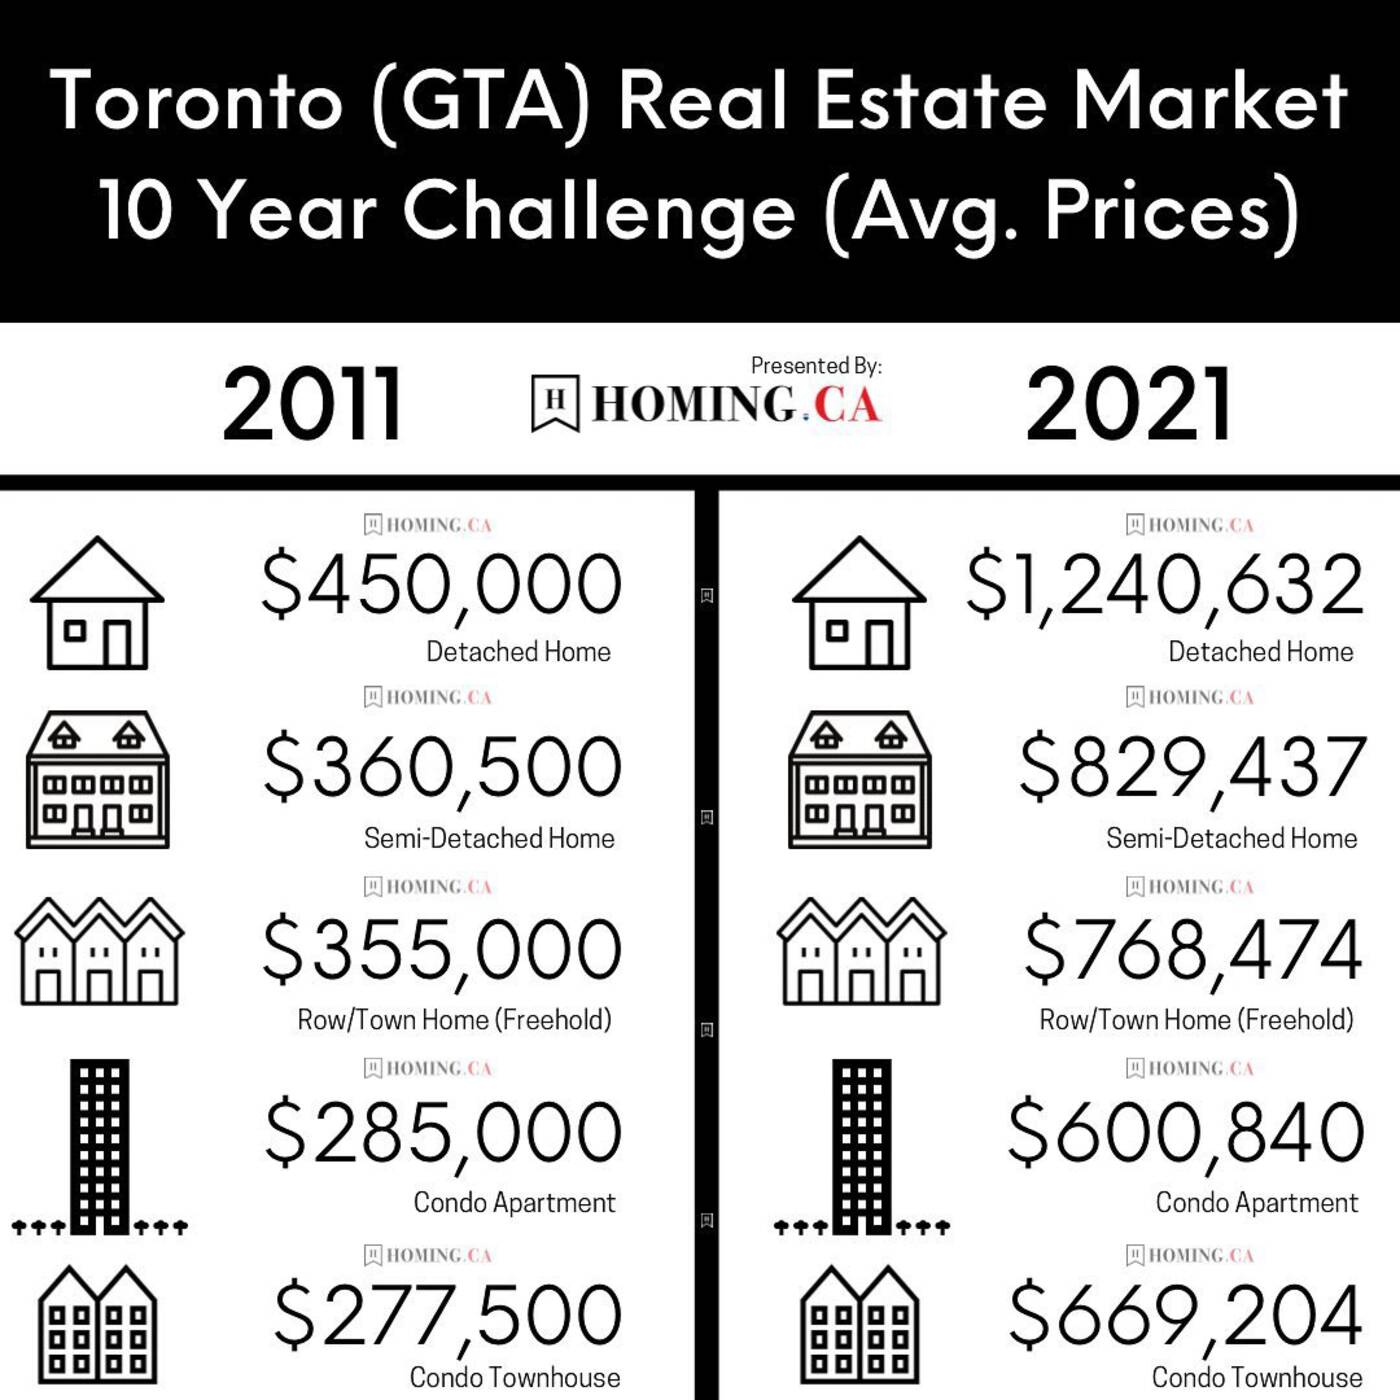 Bewildering graphic shows how much Toronto's real estate market has